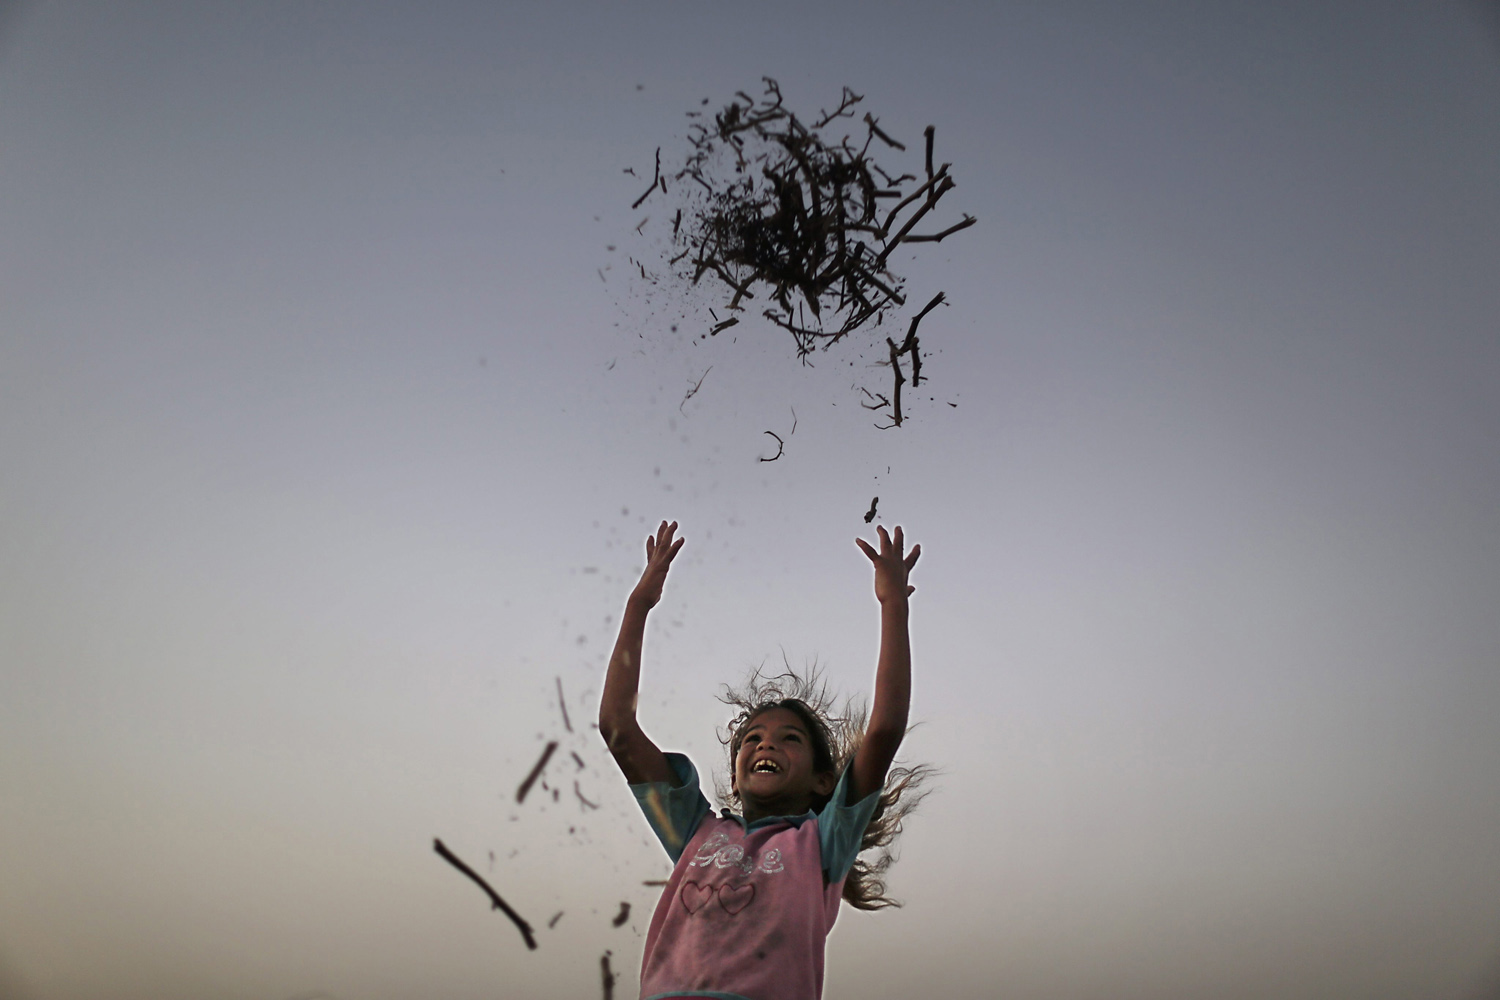 Aug. 27, 2013. A Palestinian girl play outside her family's tent in a poverty-stricken quarter of the town of Younis in the southern Gaza Strip.